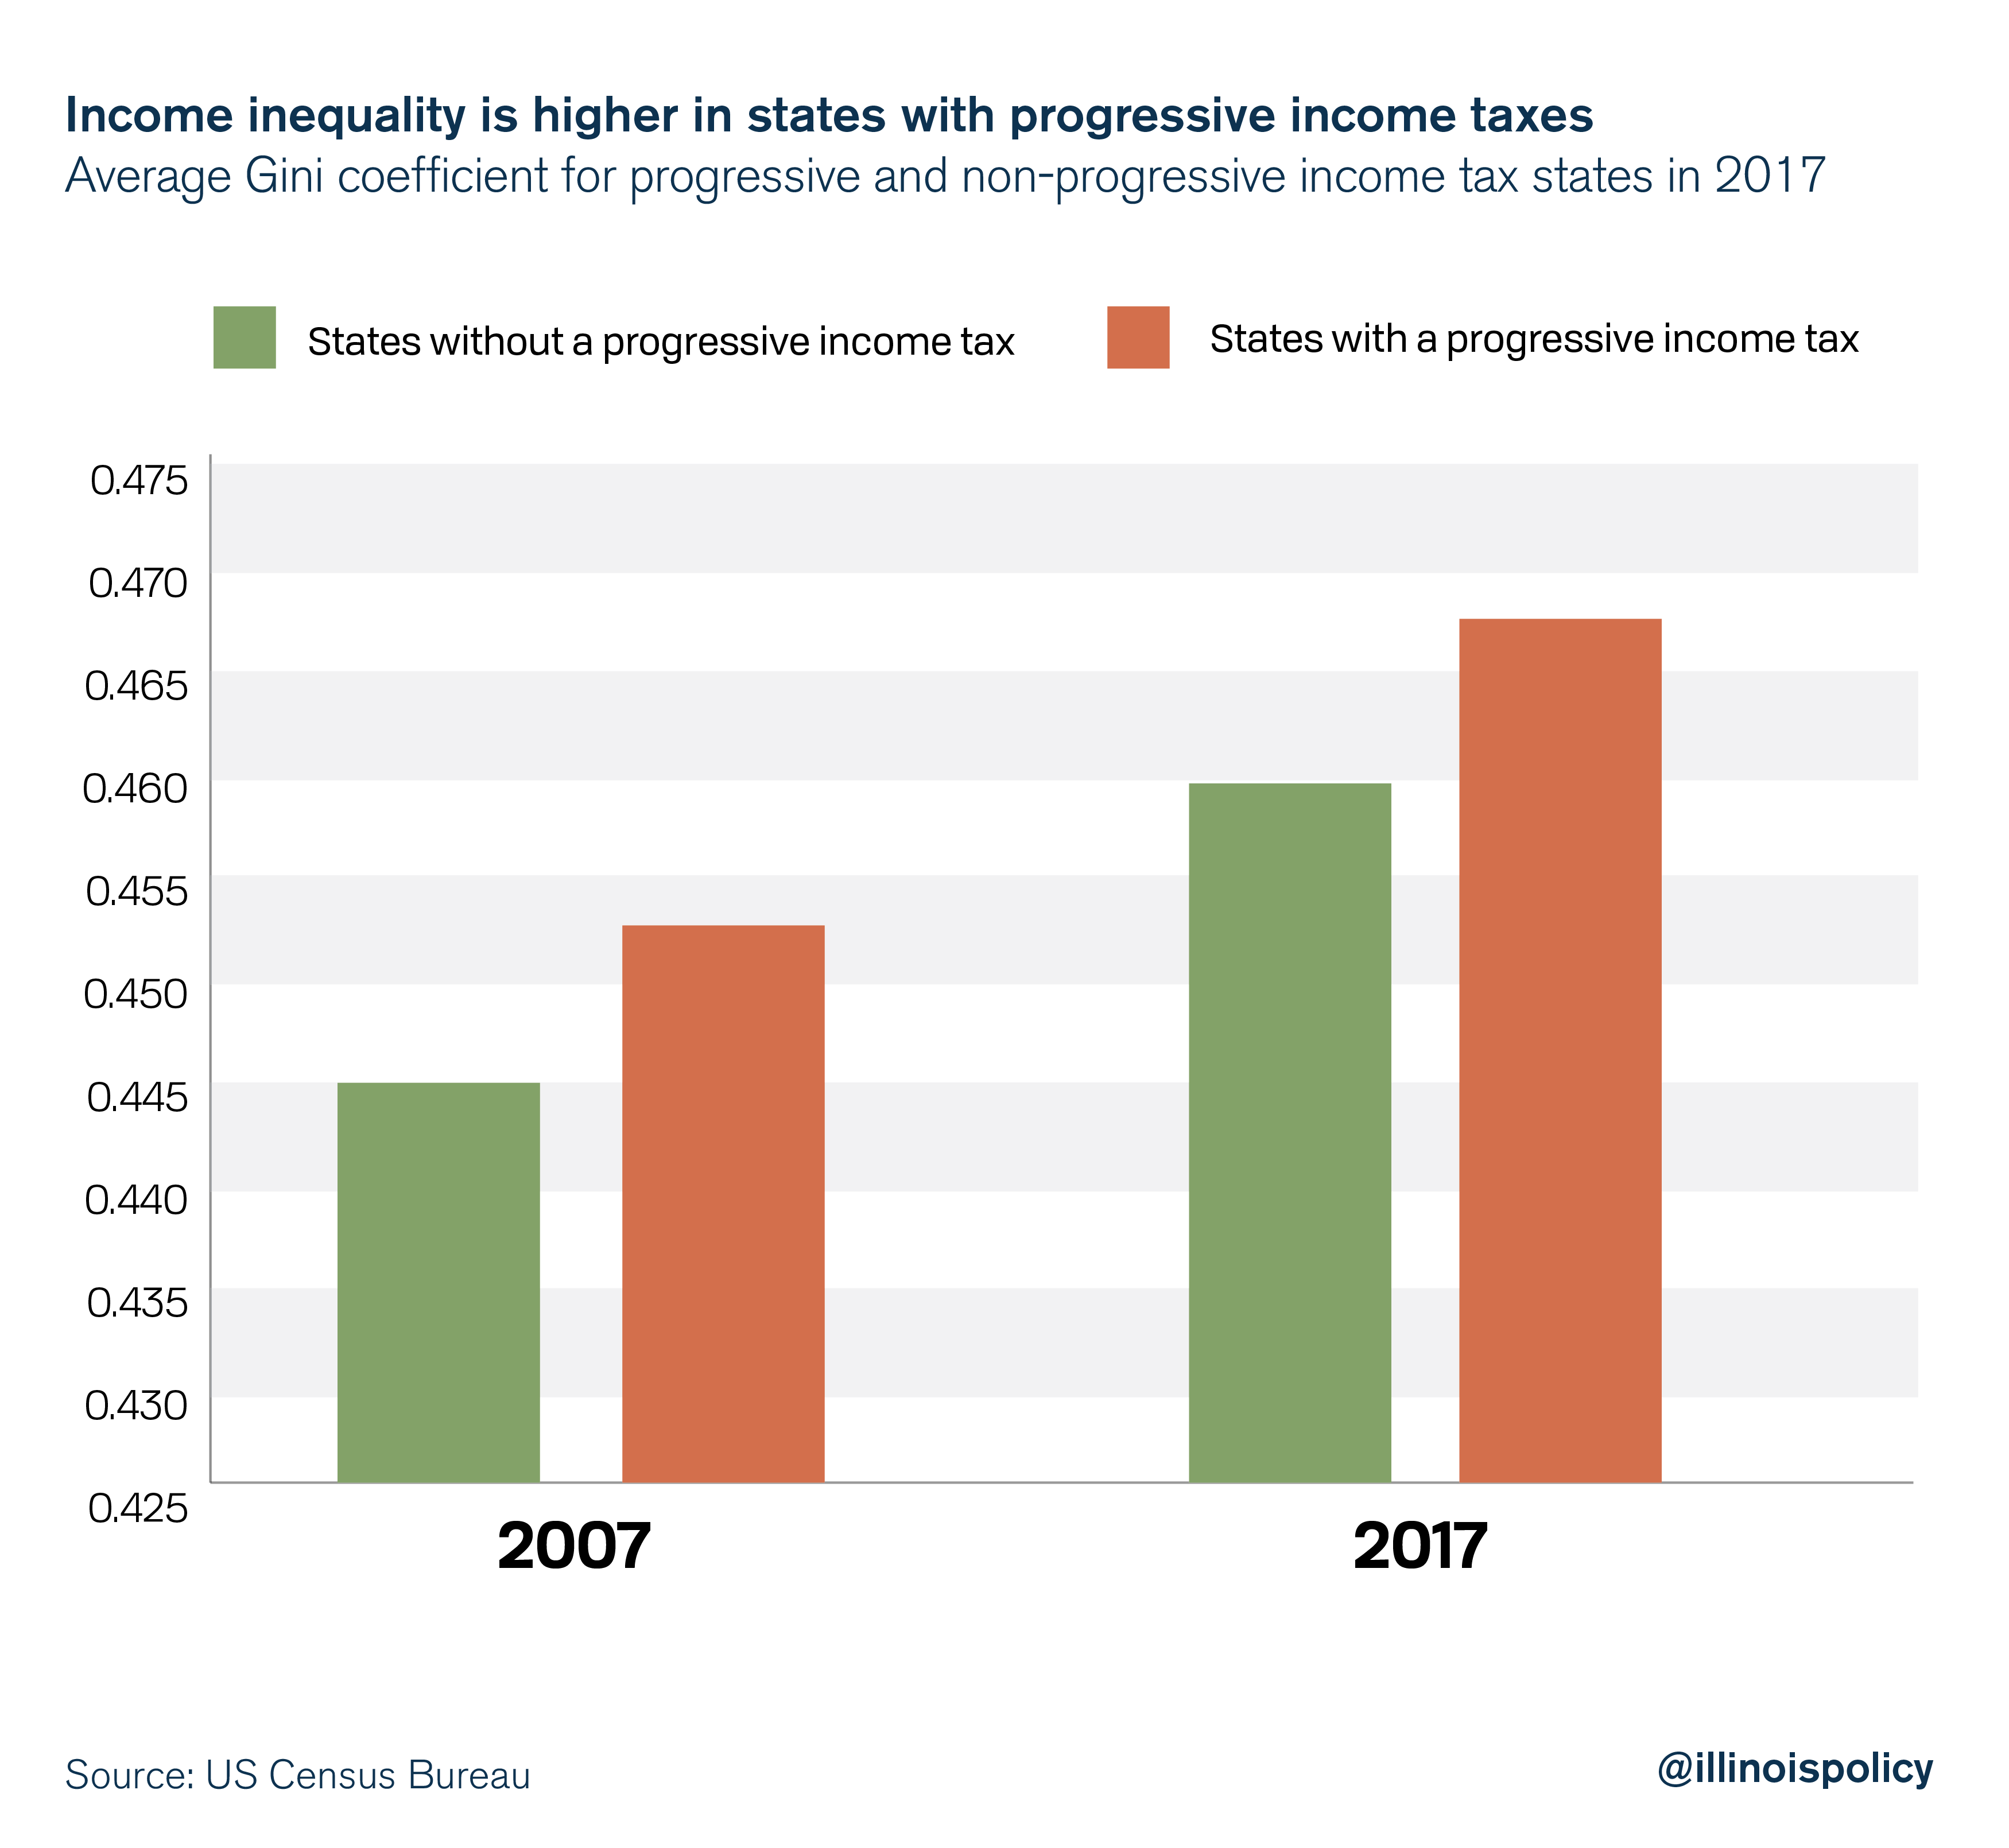 Income inequality is higher in states with progressive income taxes